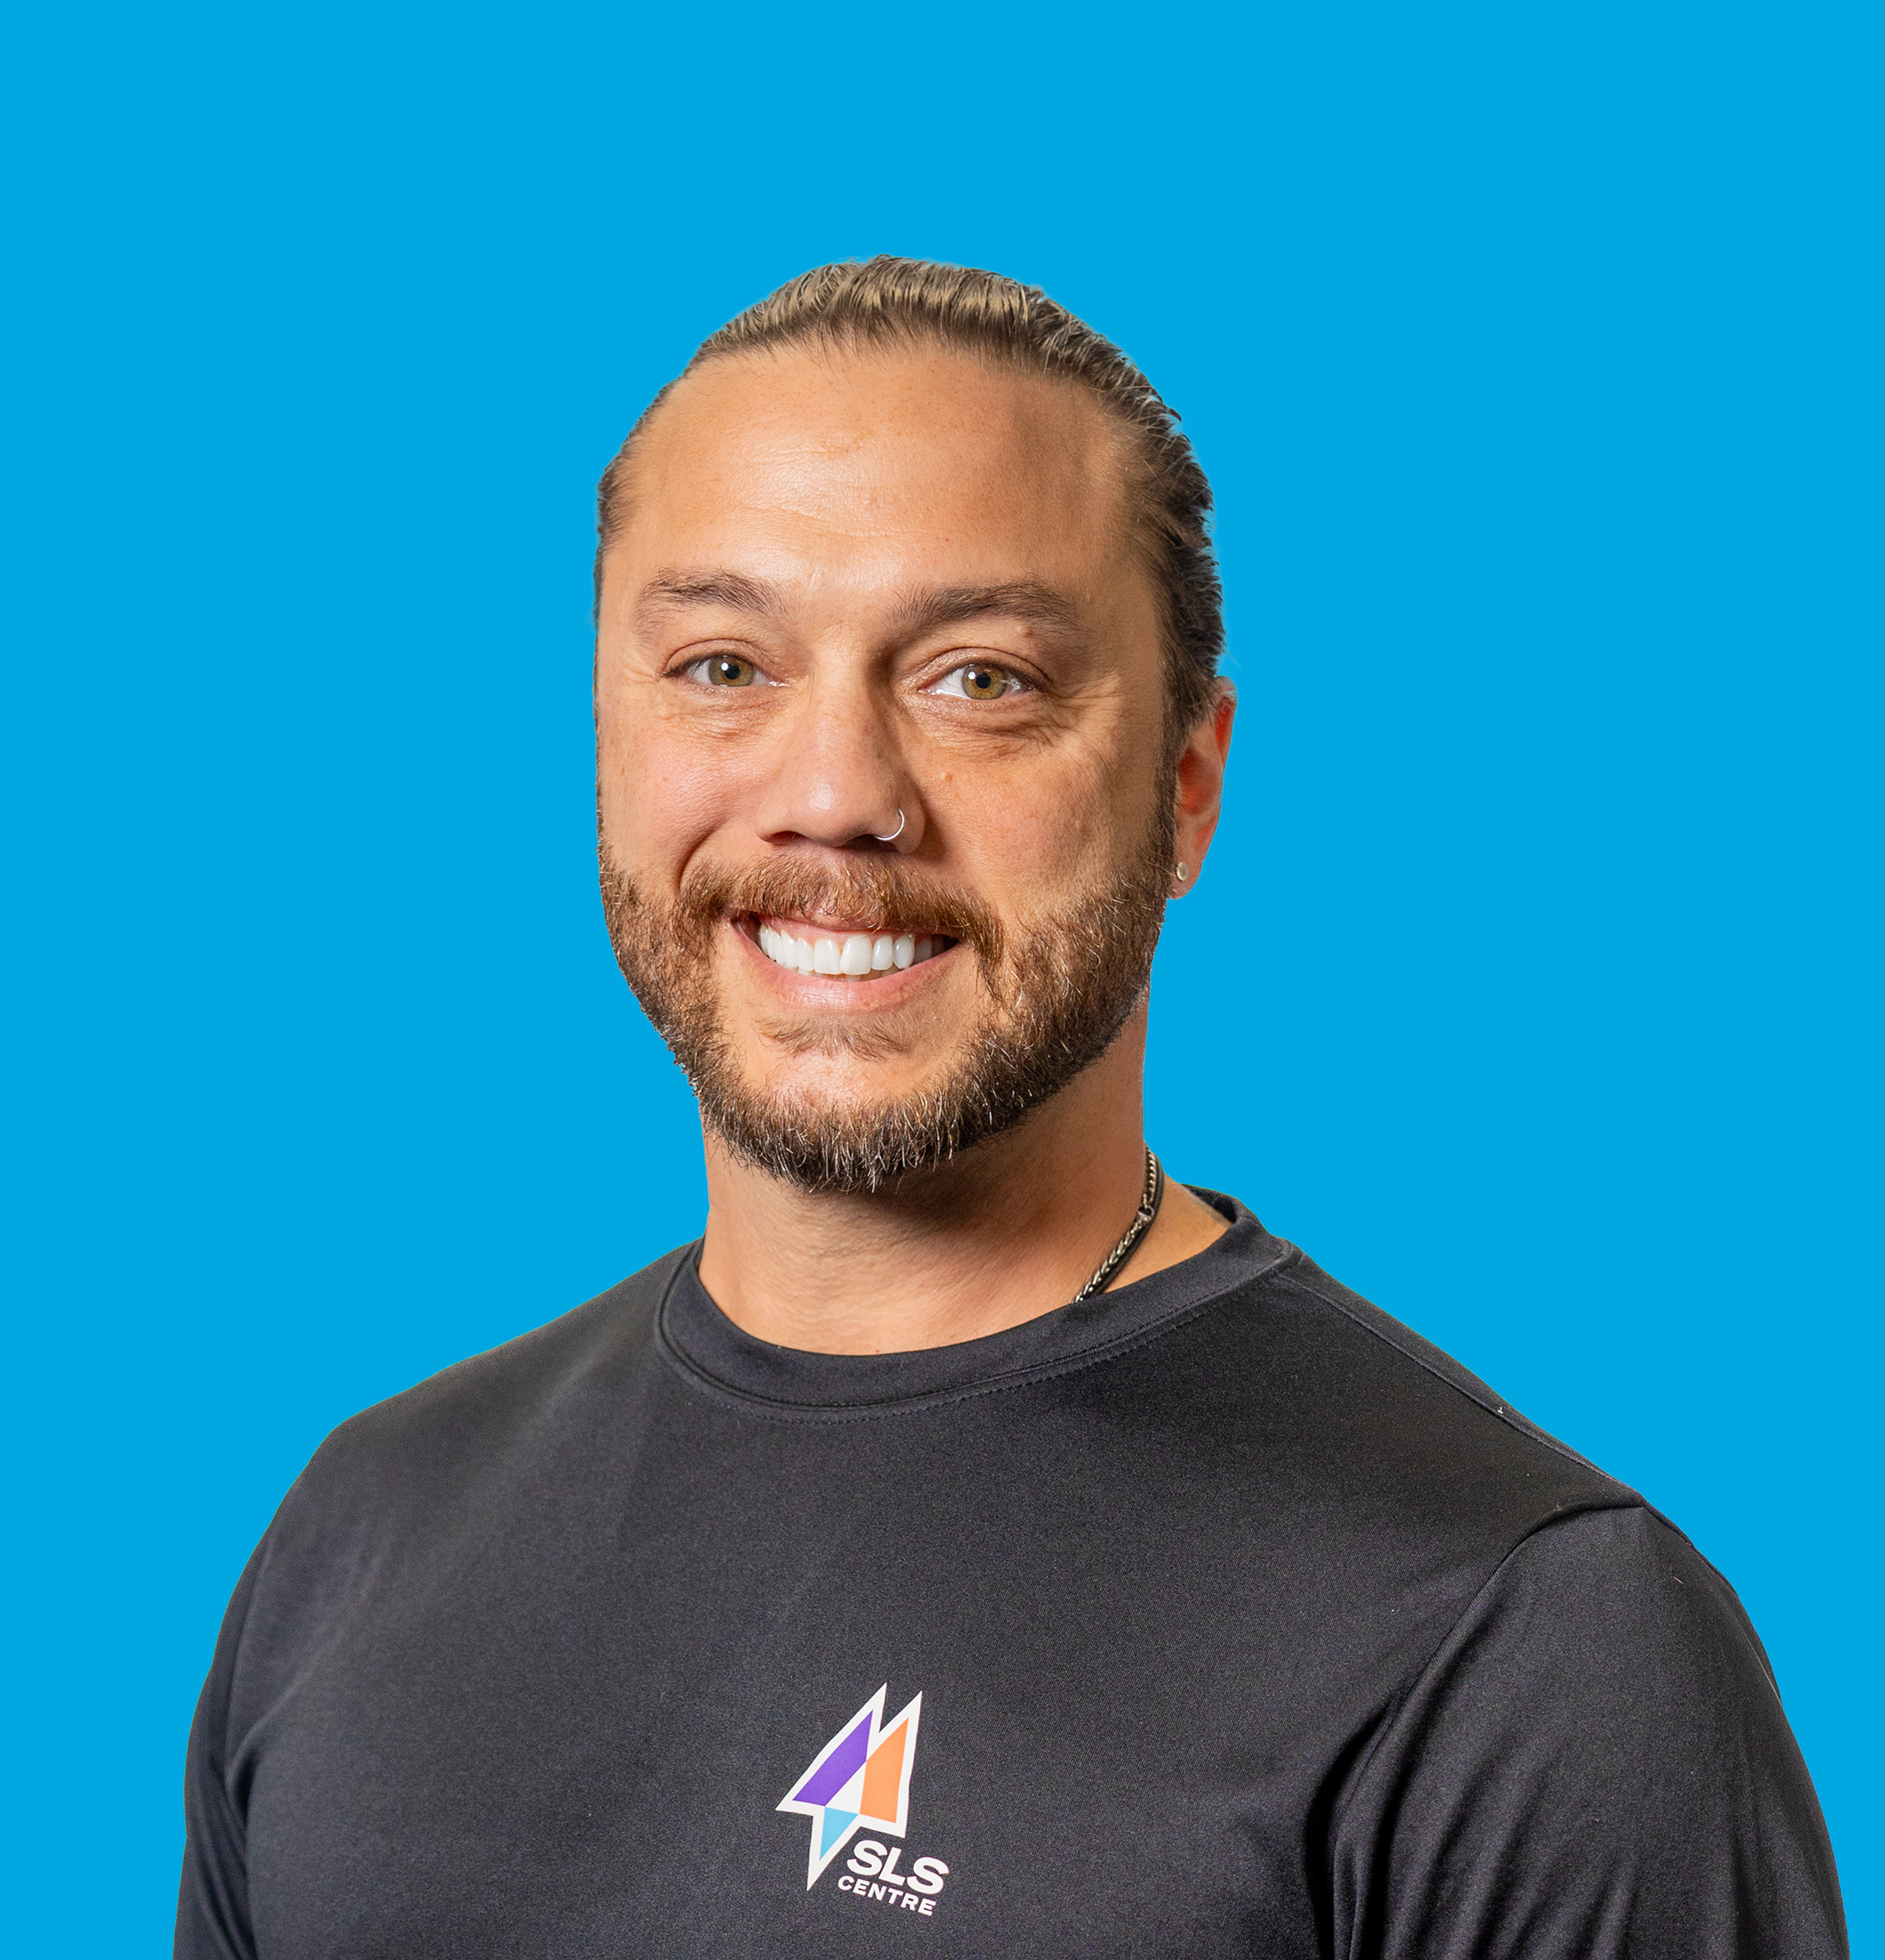 A profile photo of a male personal trainer smiling.